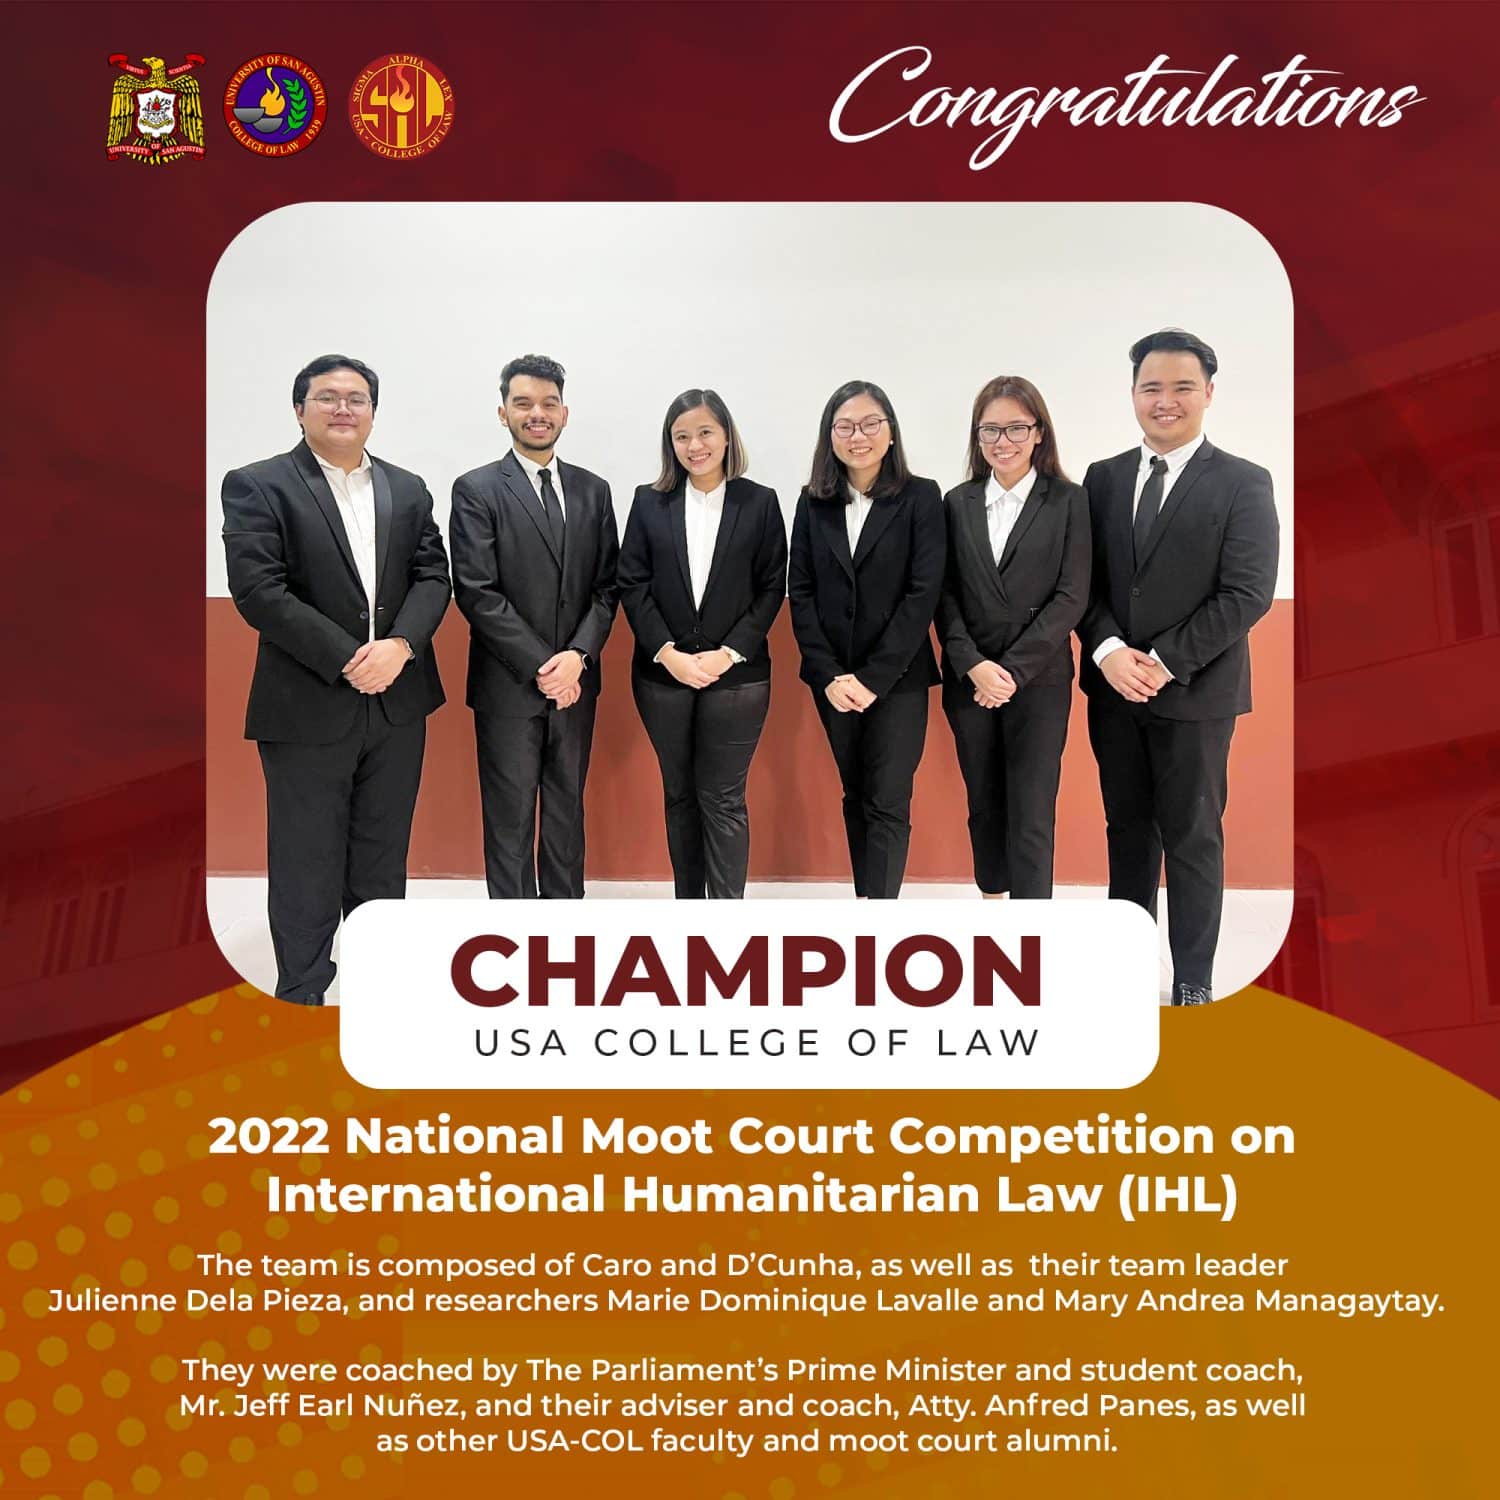 USA College of Law Moot Court Team wins back-to-back Championship - Champion